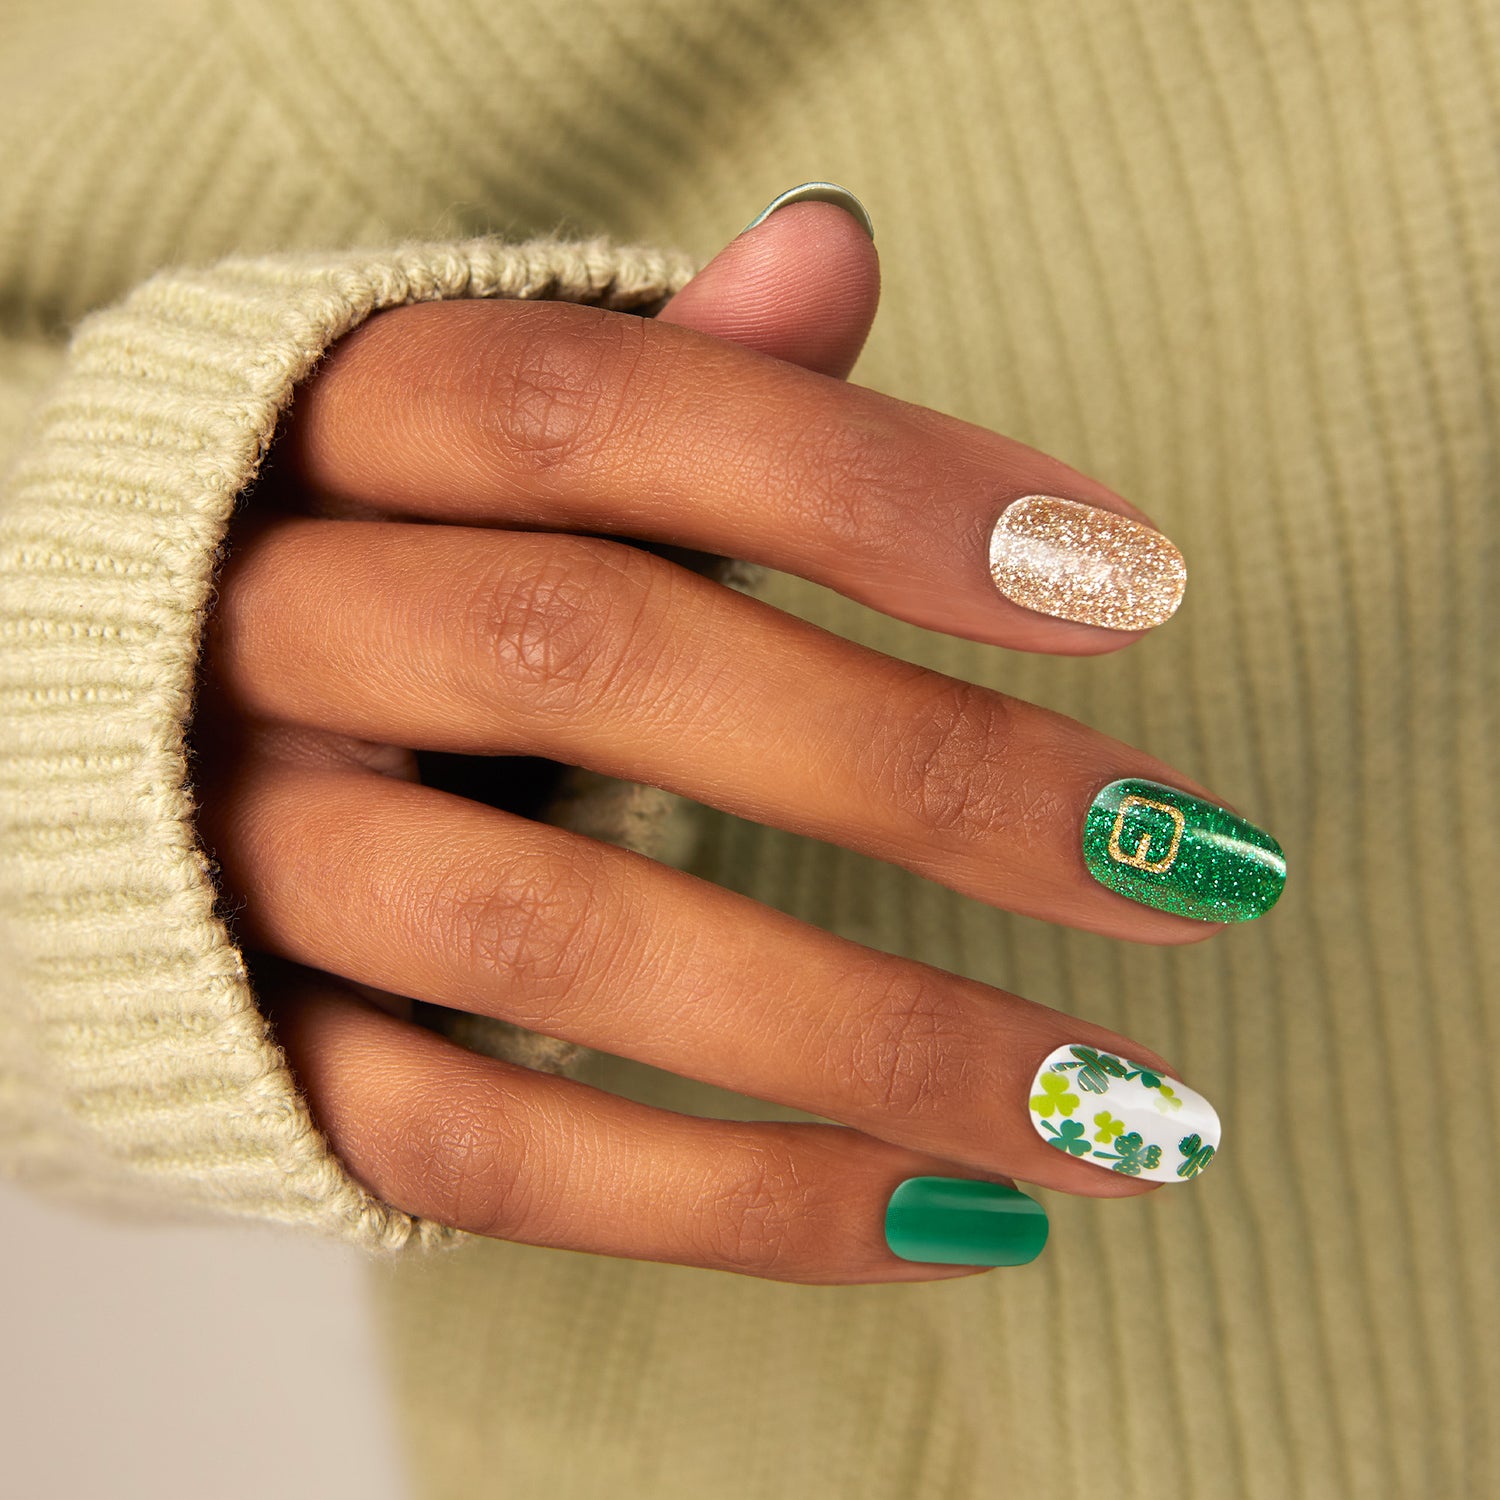 Shamrock green nail strips featuring green four-leaf clovers, gold glitter, and belt buckle accents with a glossy, high-shine finish.